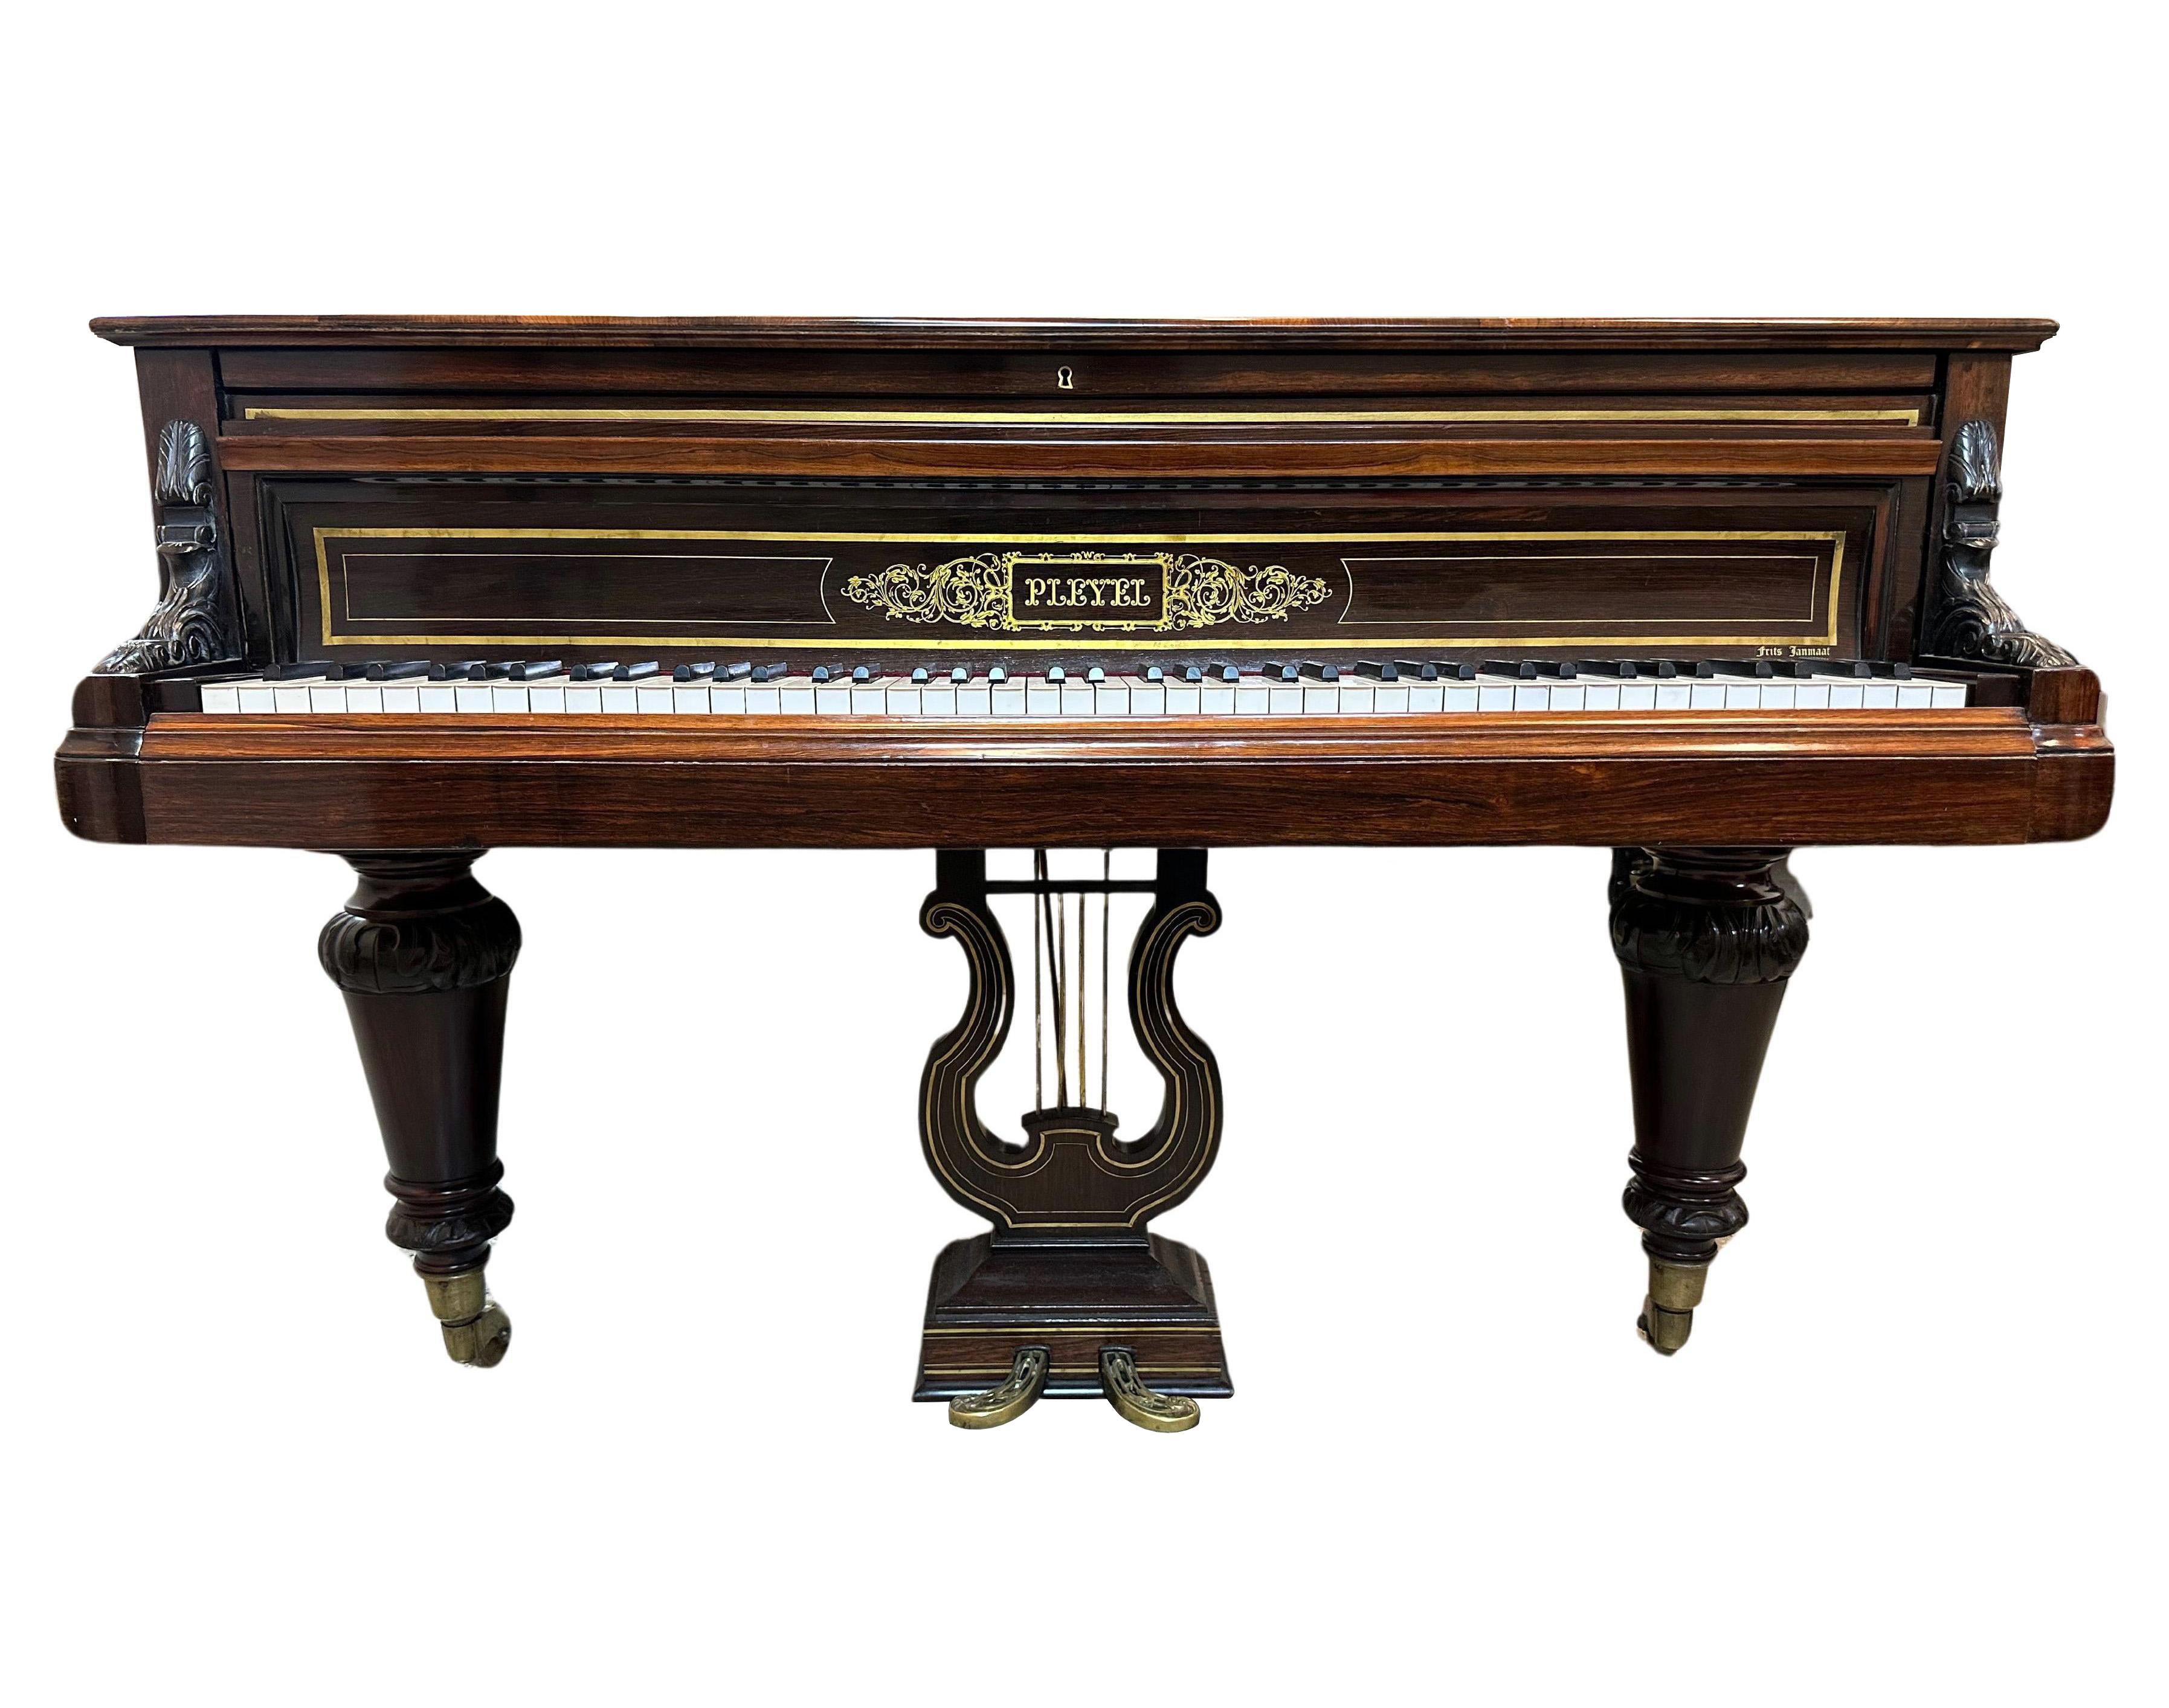 This Pleyel concert grand piano crafted in Paris in 1870 is a timeless masterpiece that embodies the elegance and craftsmanship of 19th-century French piano manufacturing. Pleyel instruments are renowned for their exceptional quality and rich